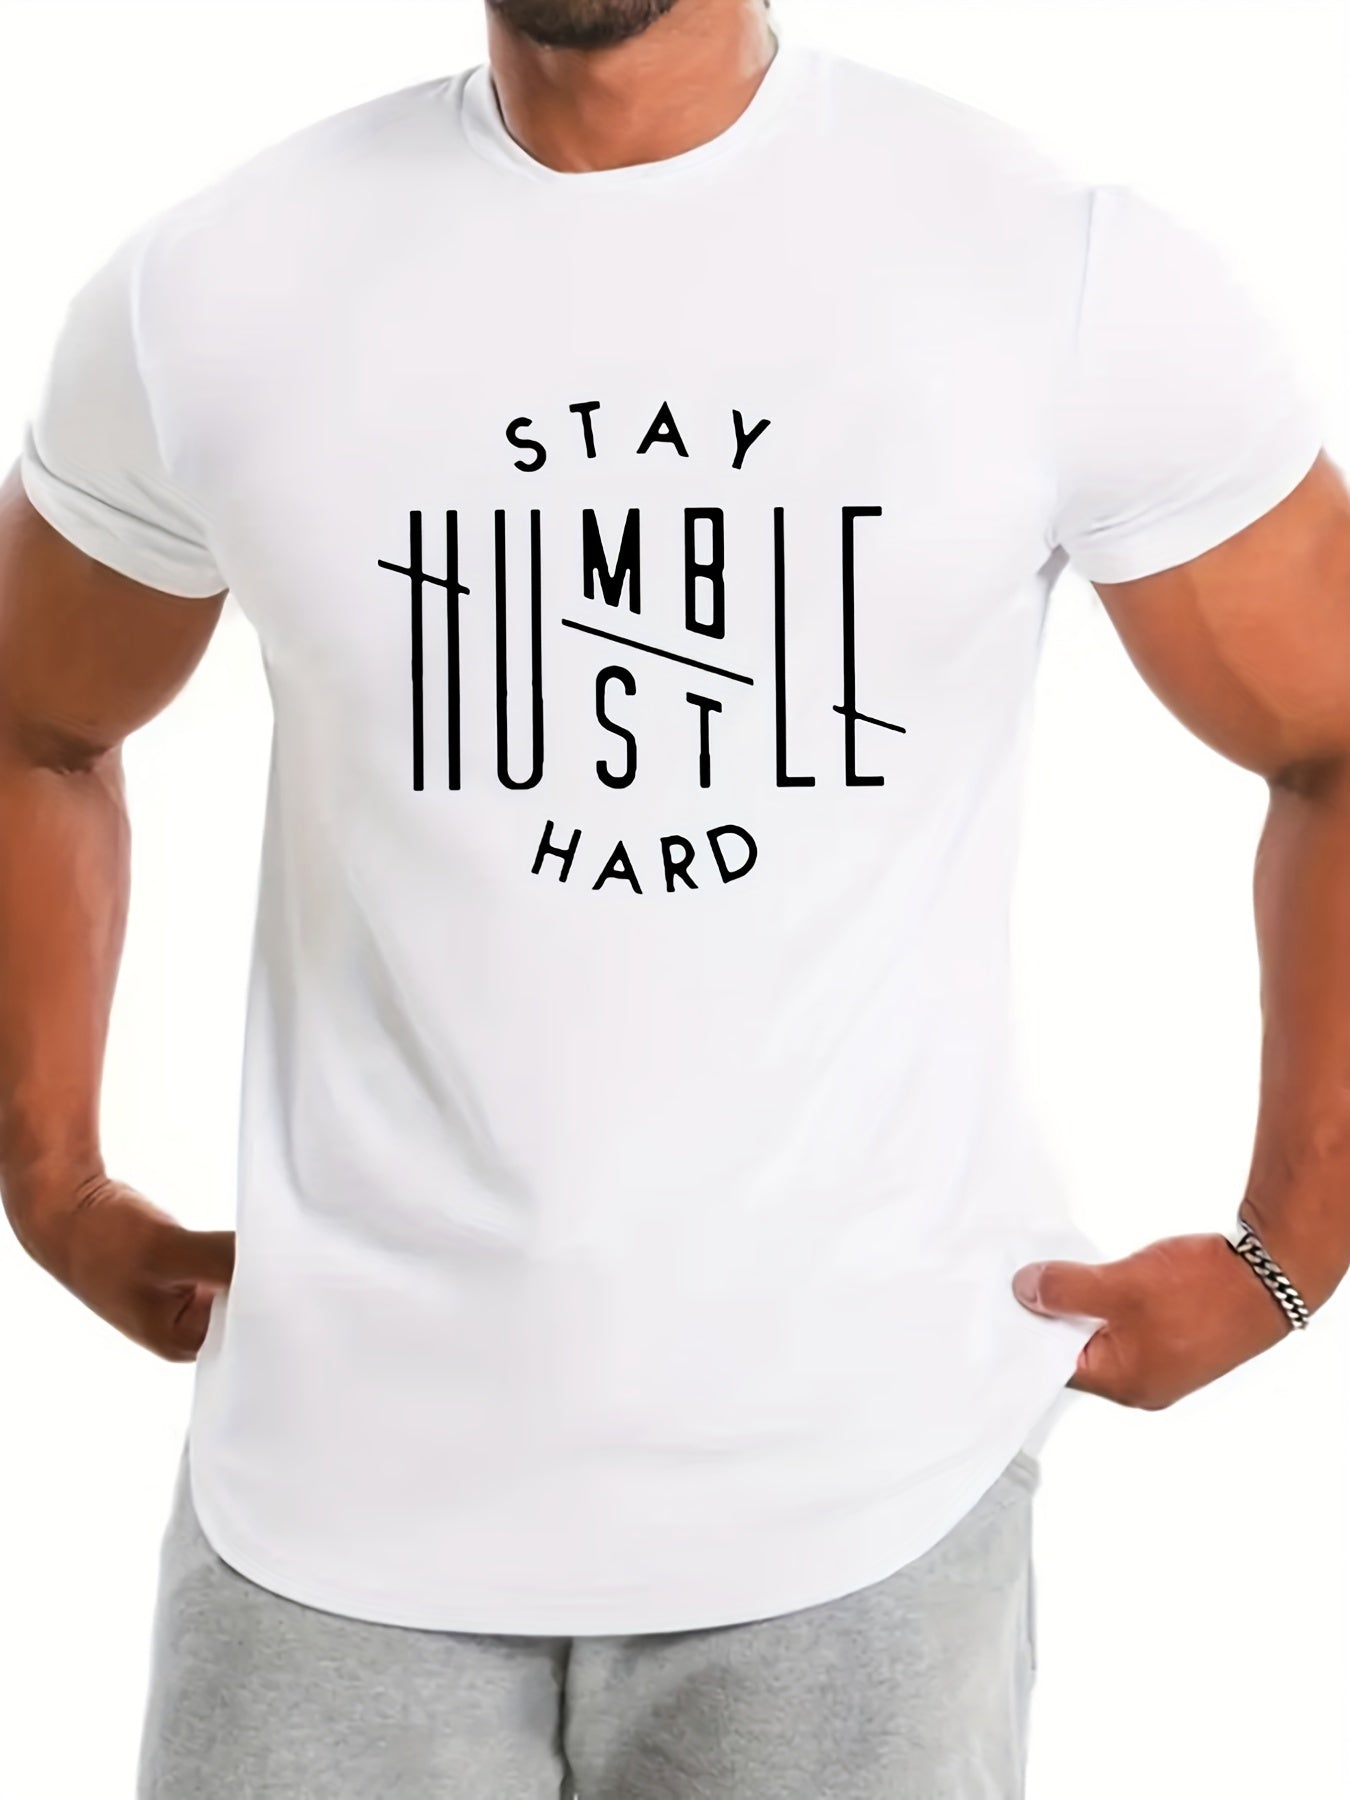 STAY HUMBLE HUSTLE HARD Men's Graphic Tee - Slightly Stretch Summer Shirt